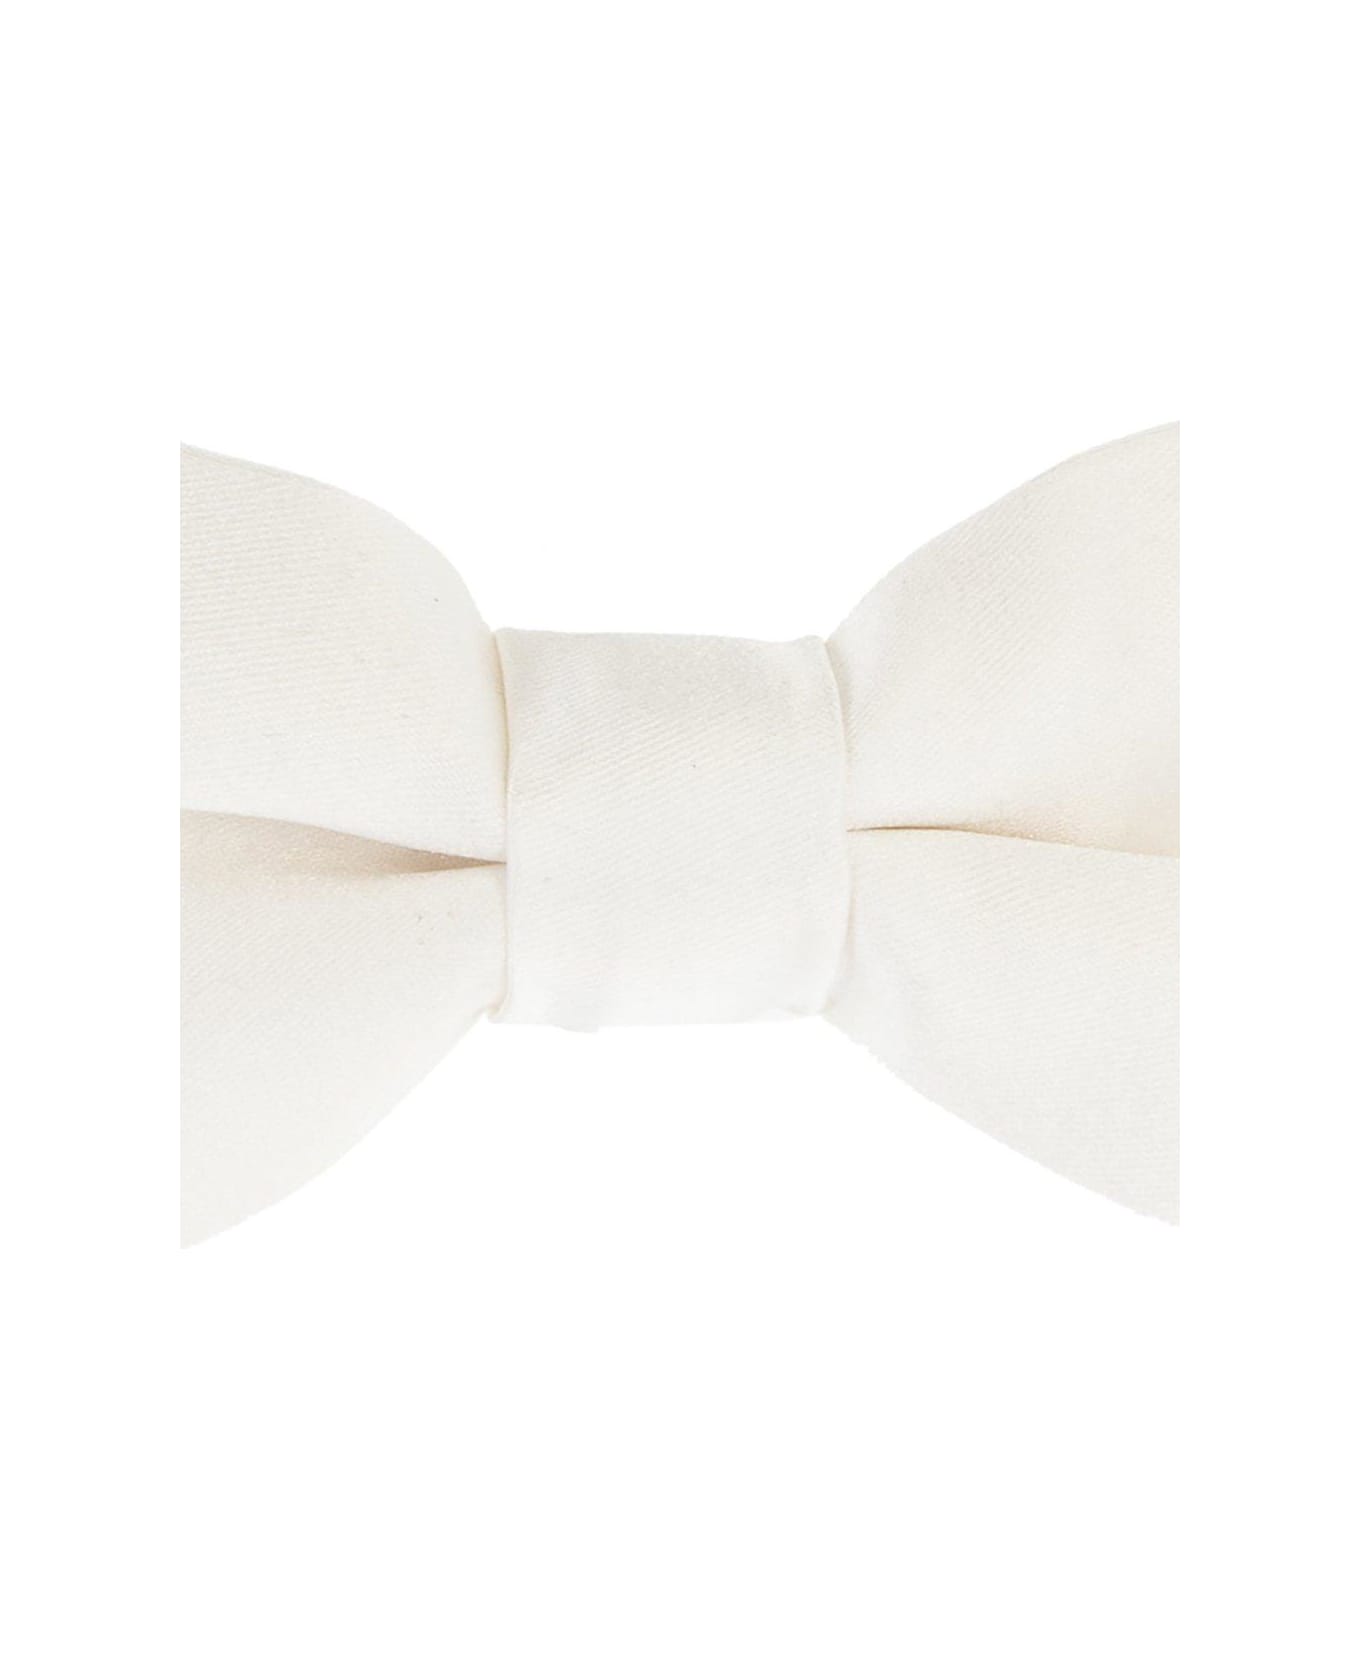 Givenchy Papillon Hook-clipped Bow Tie